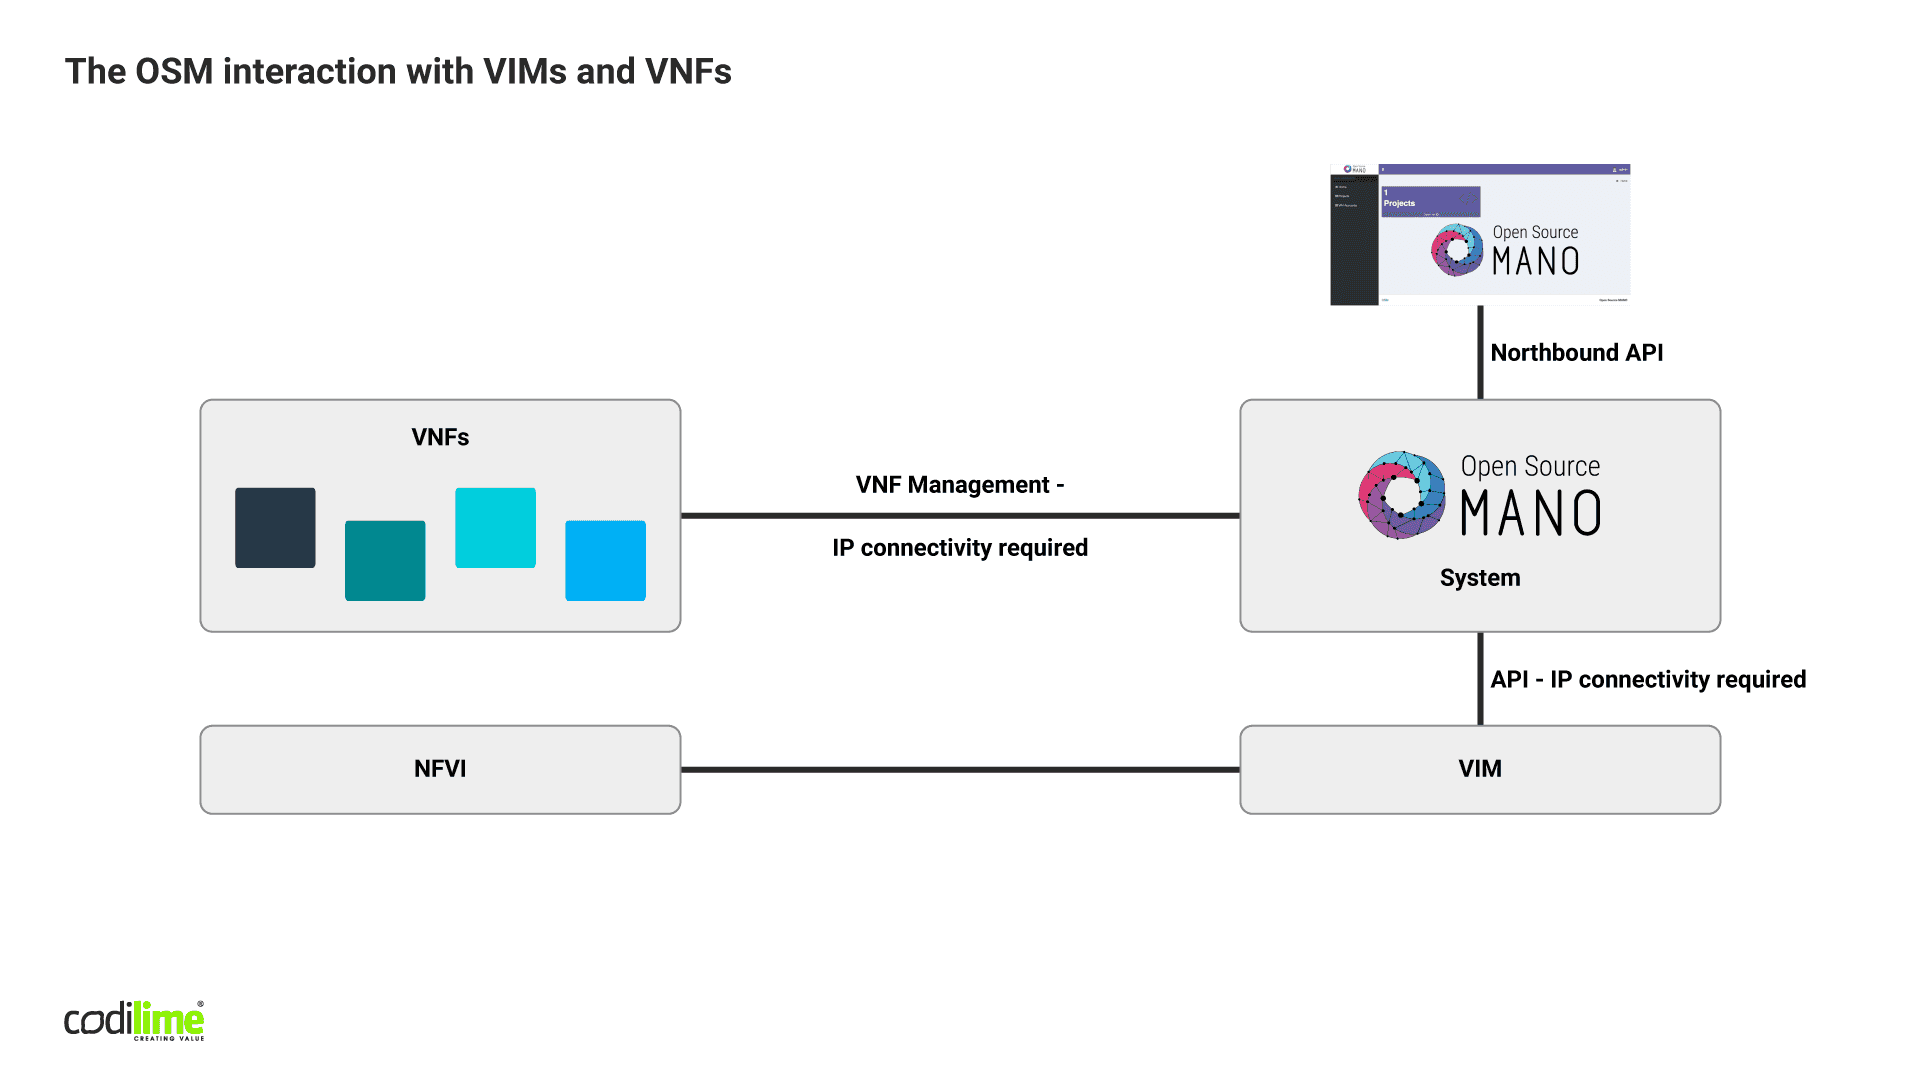 The OSM interaction with VIMs and VNFs